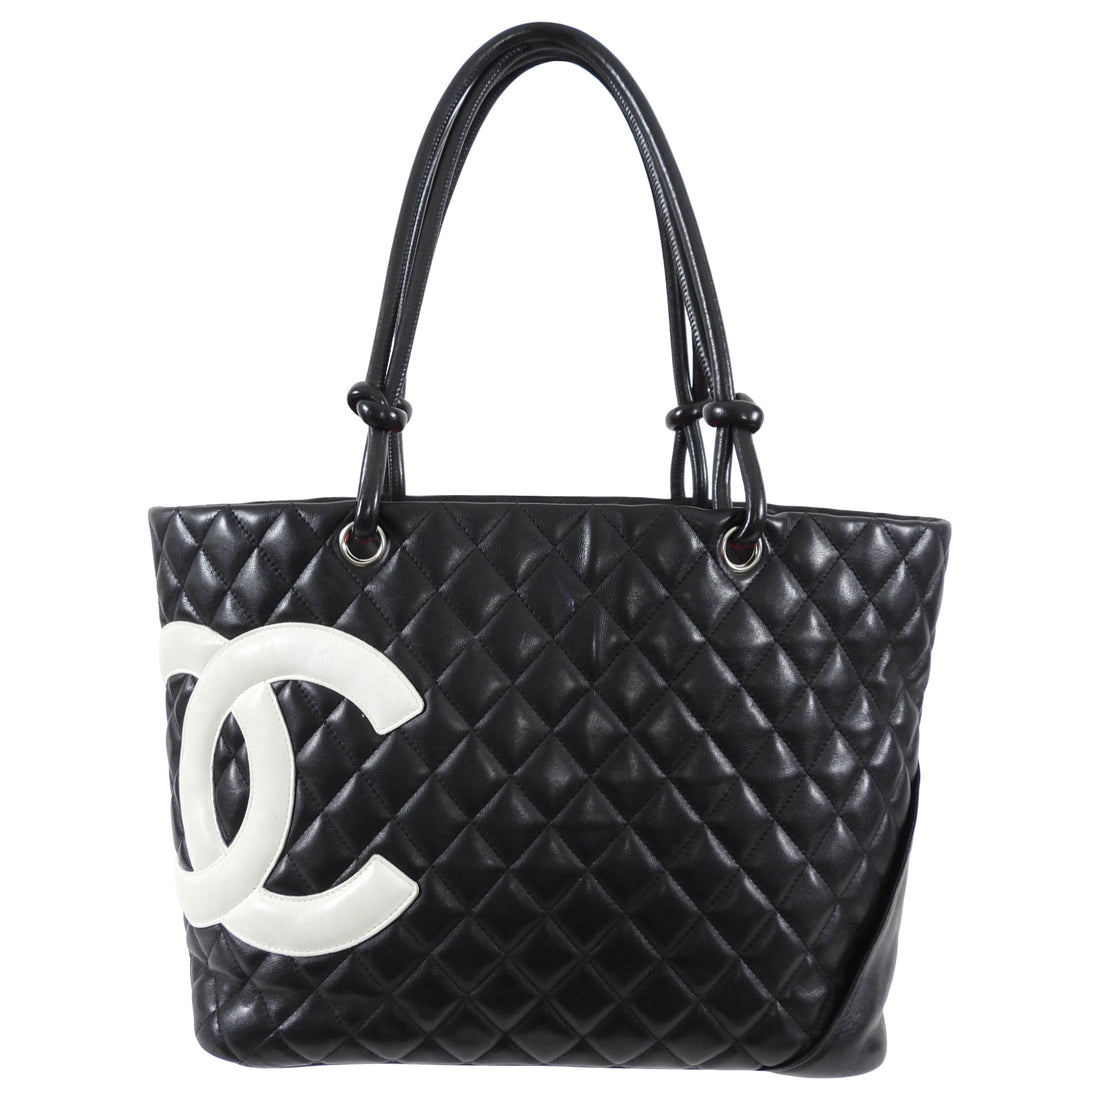 New and Gently Used Chanel Bags, Accessories & Clothing – VSP Consignment